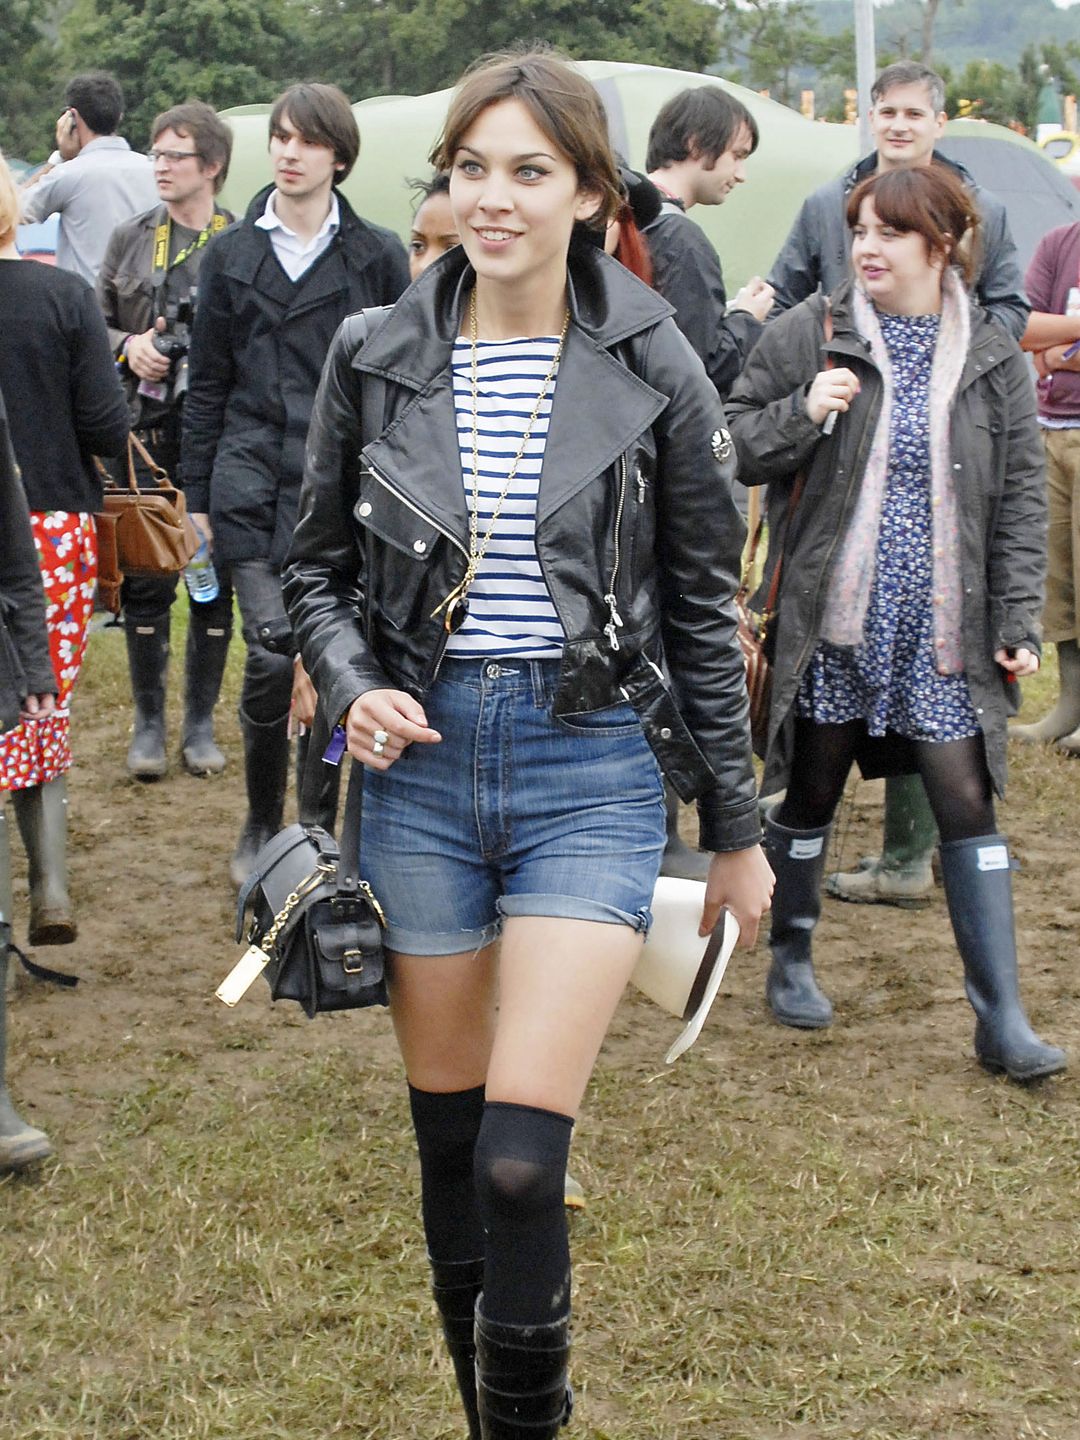 Alexa Chung  attends Glastonbury Festival in 2008 wearing a stripe shirt, leather jacket, denim mini shorts and over-the-knee socks